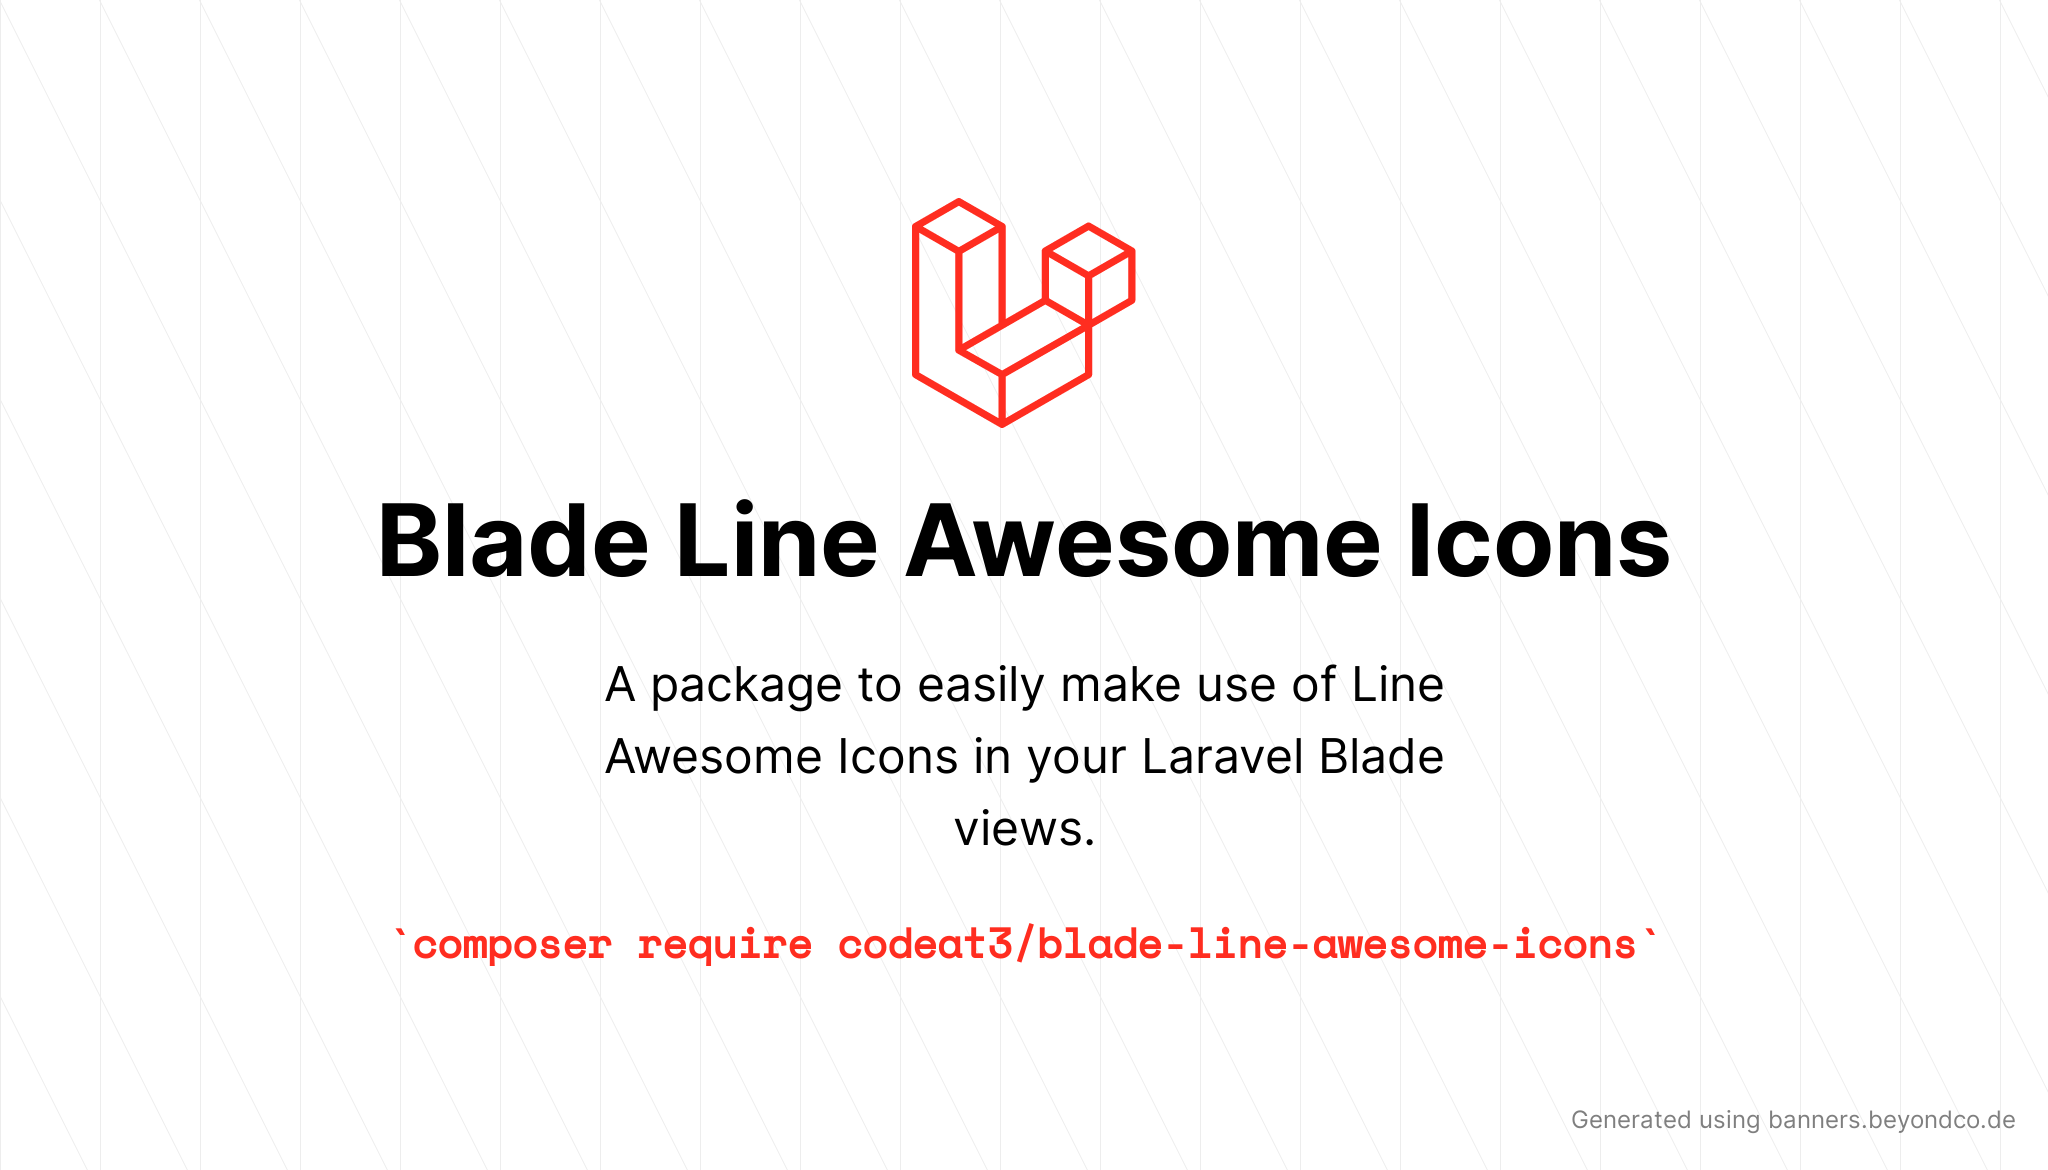 socialcard-blade-line-awesome.png